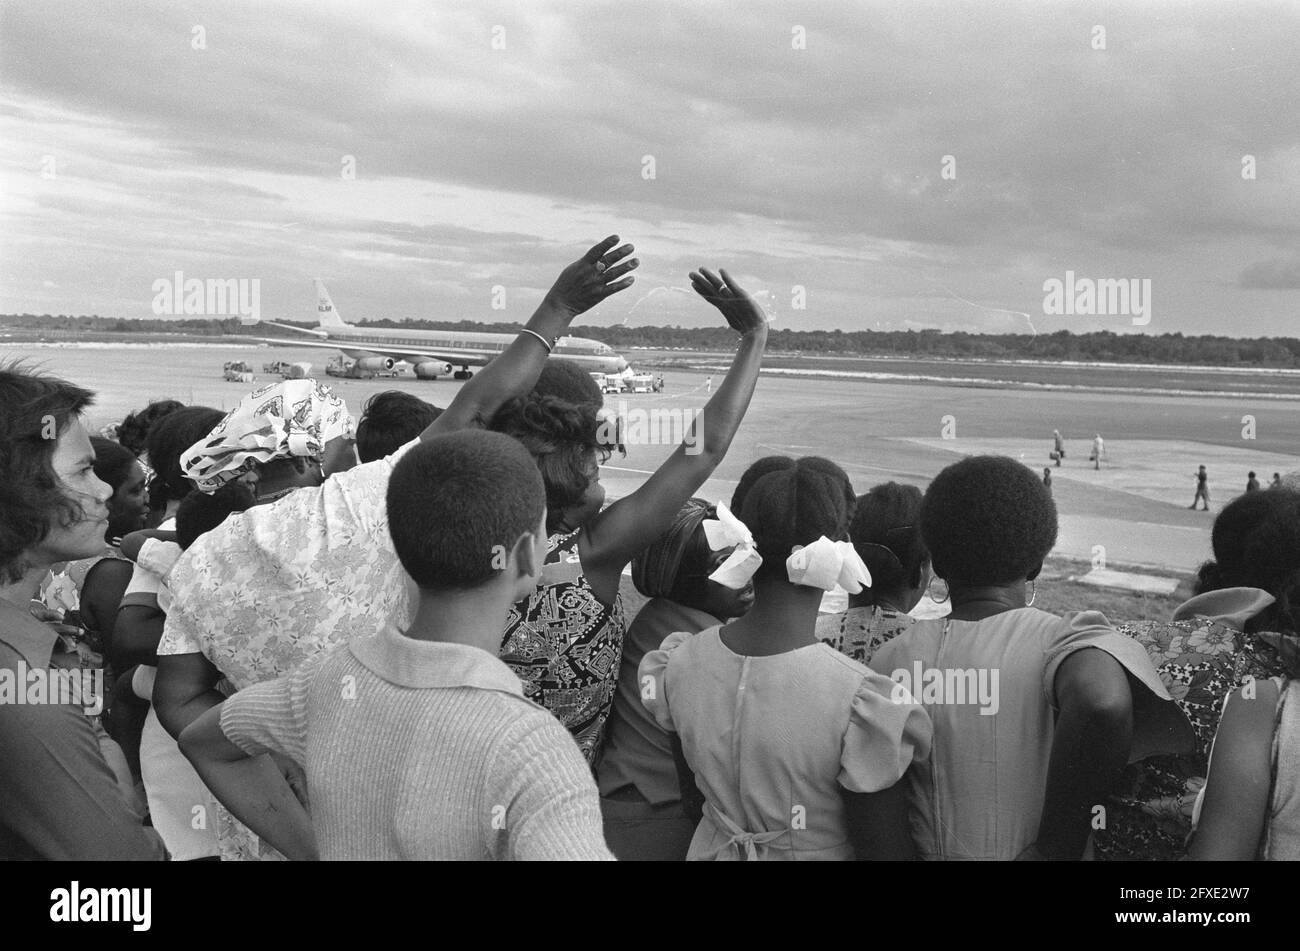 Suriname, Zanderij airport; crowd on pier, April 1, 1975, airports, The Netherlands, 20th century press agency photo, news to remember, documentary, historic photography 1945-1990, visual stories, human history of the Twentieth Century, capturing moments in time Stock Photo